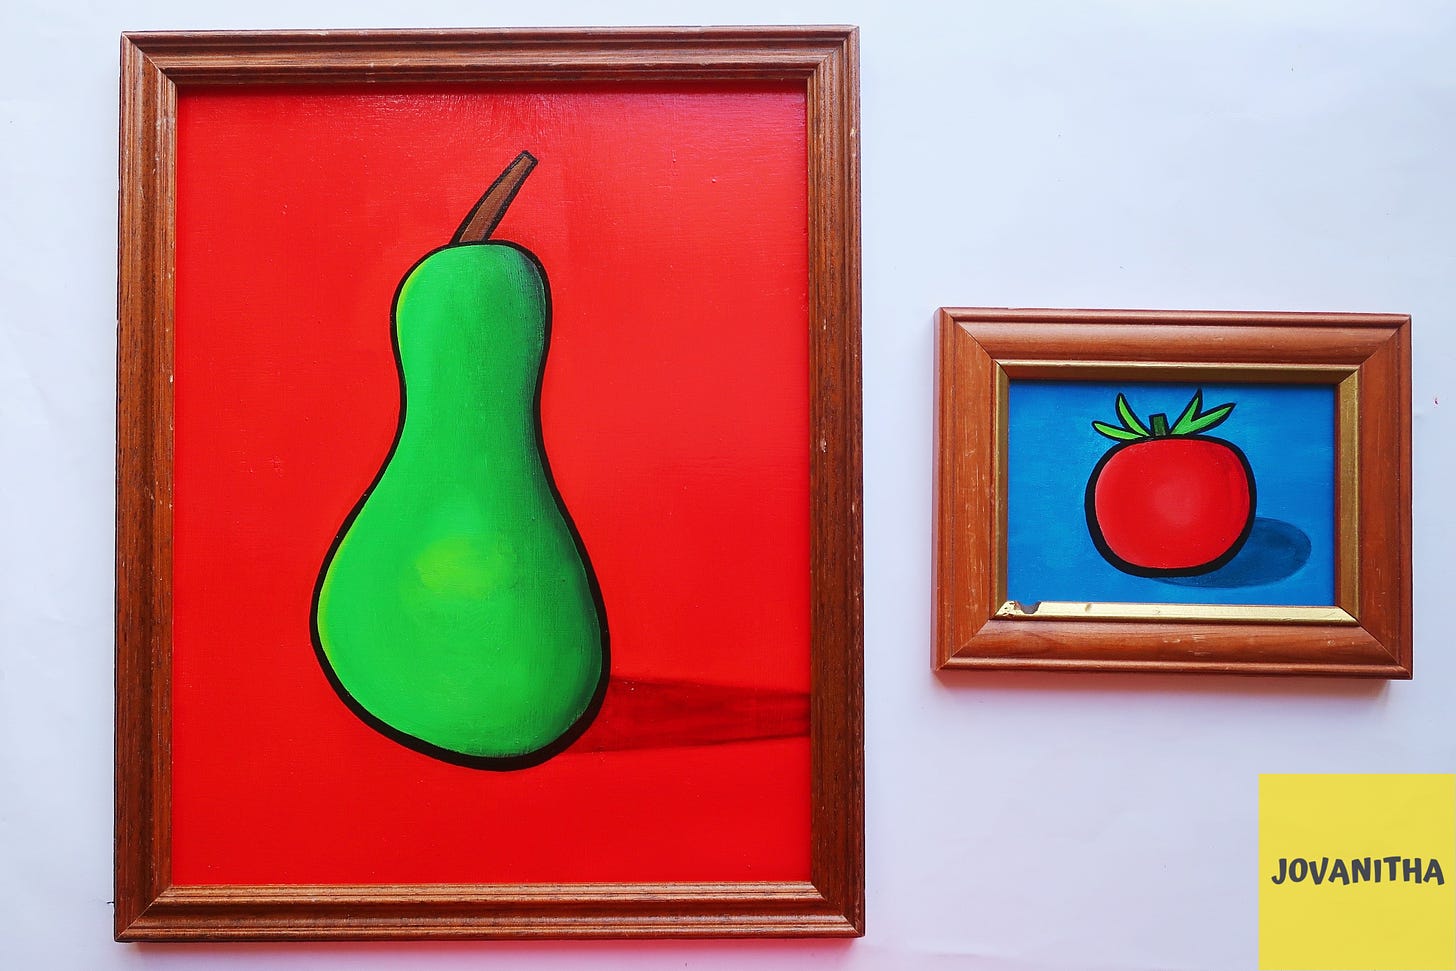 An oil painting of a green pear on a red background in a thrifted frame and a red tomato on a blue background in a thrifted frame